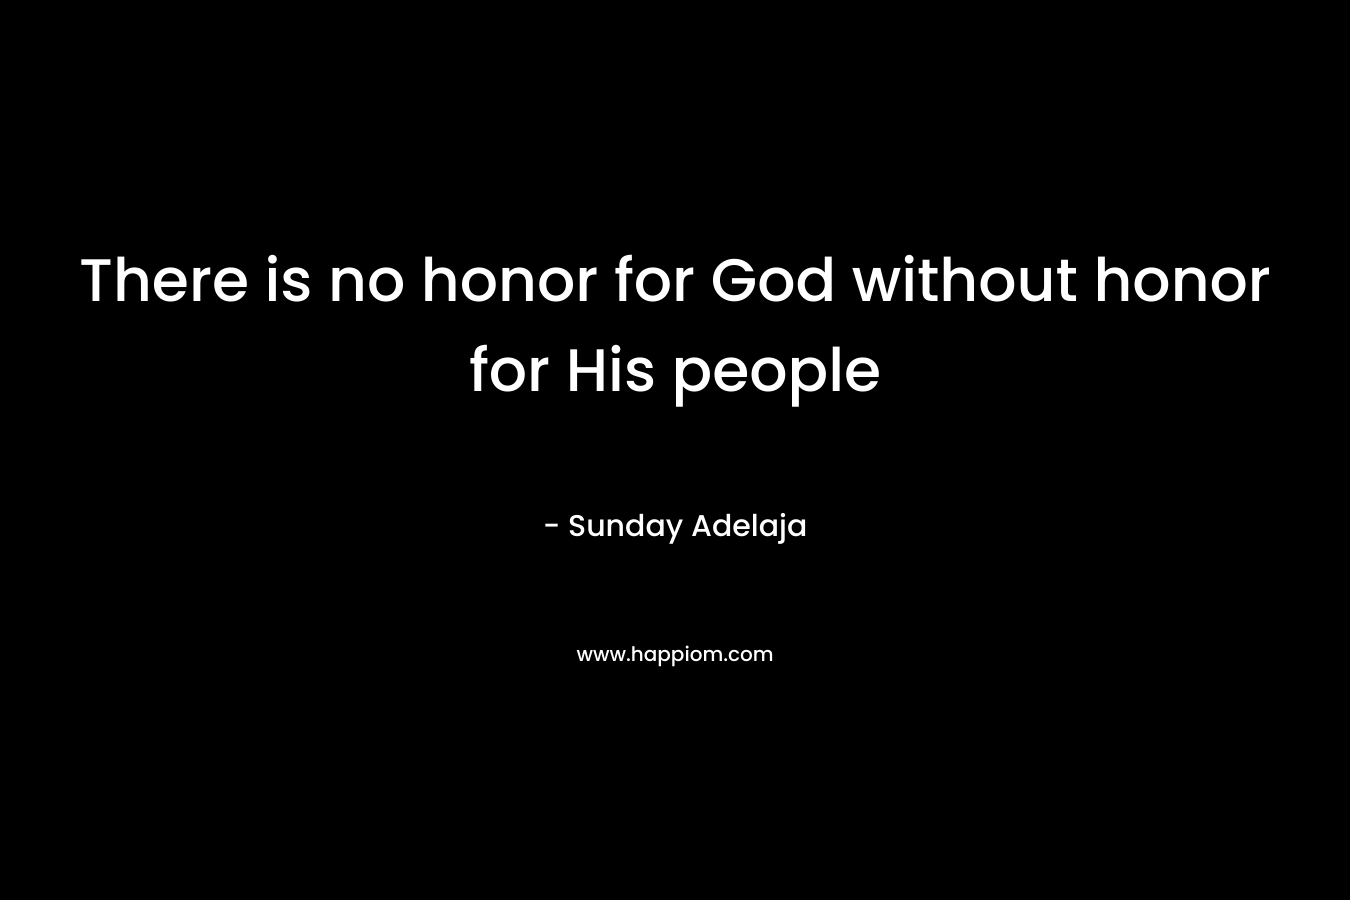 There is no honor for God without honor for His people